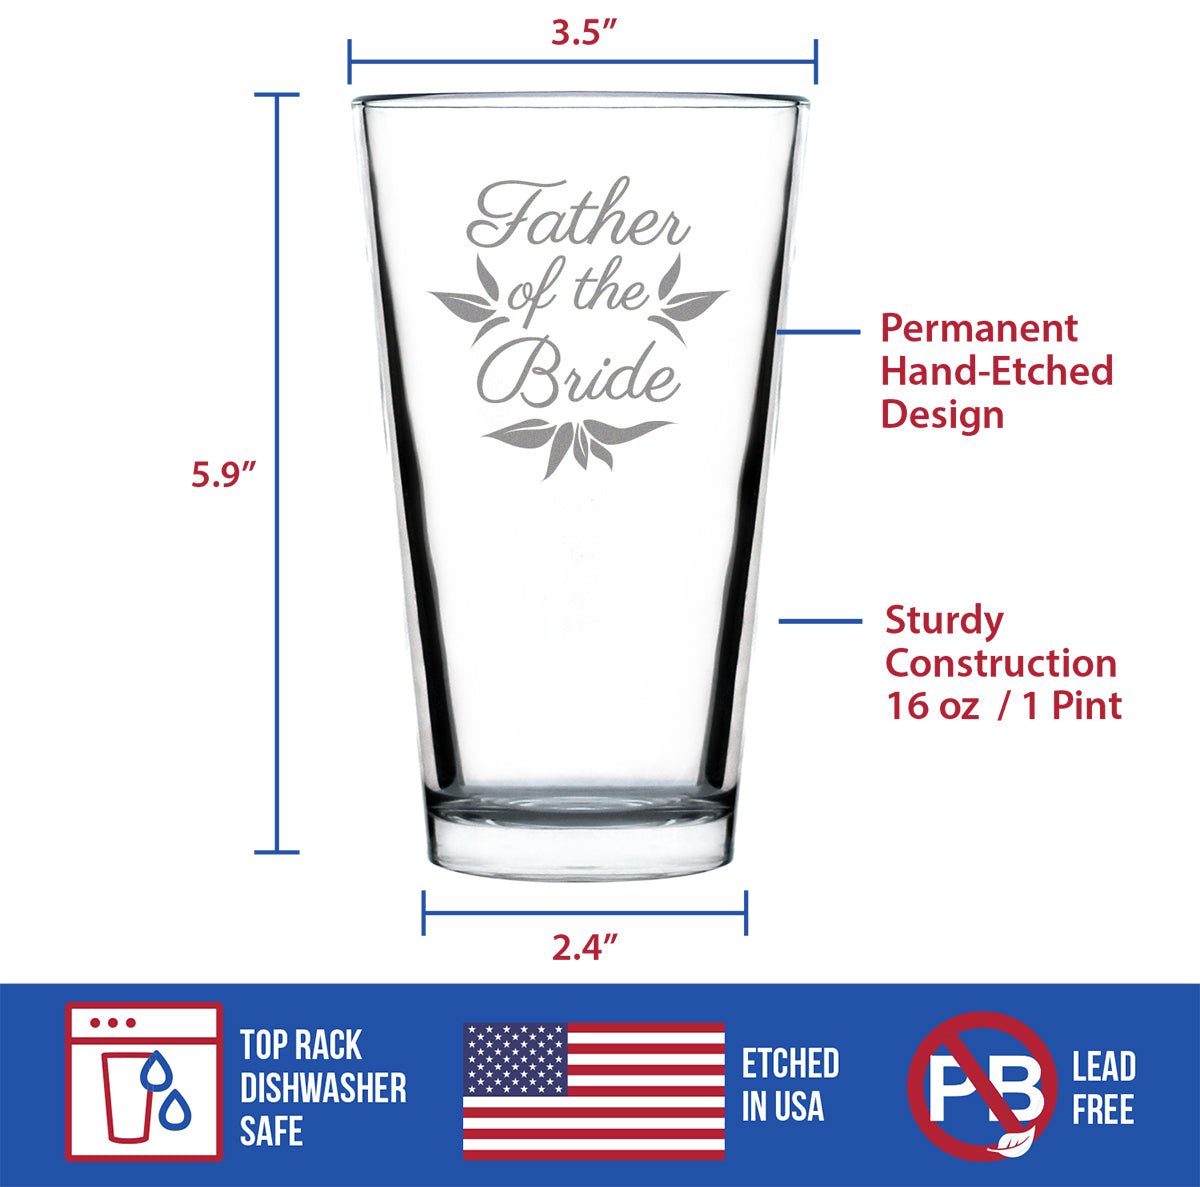 Father of the Bride Pint Glass - Unique Wedding Gift for Soon to Be Father-in-Law - Cute Engraved Wedding Cup Gift